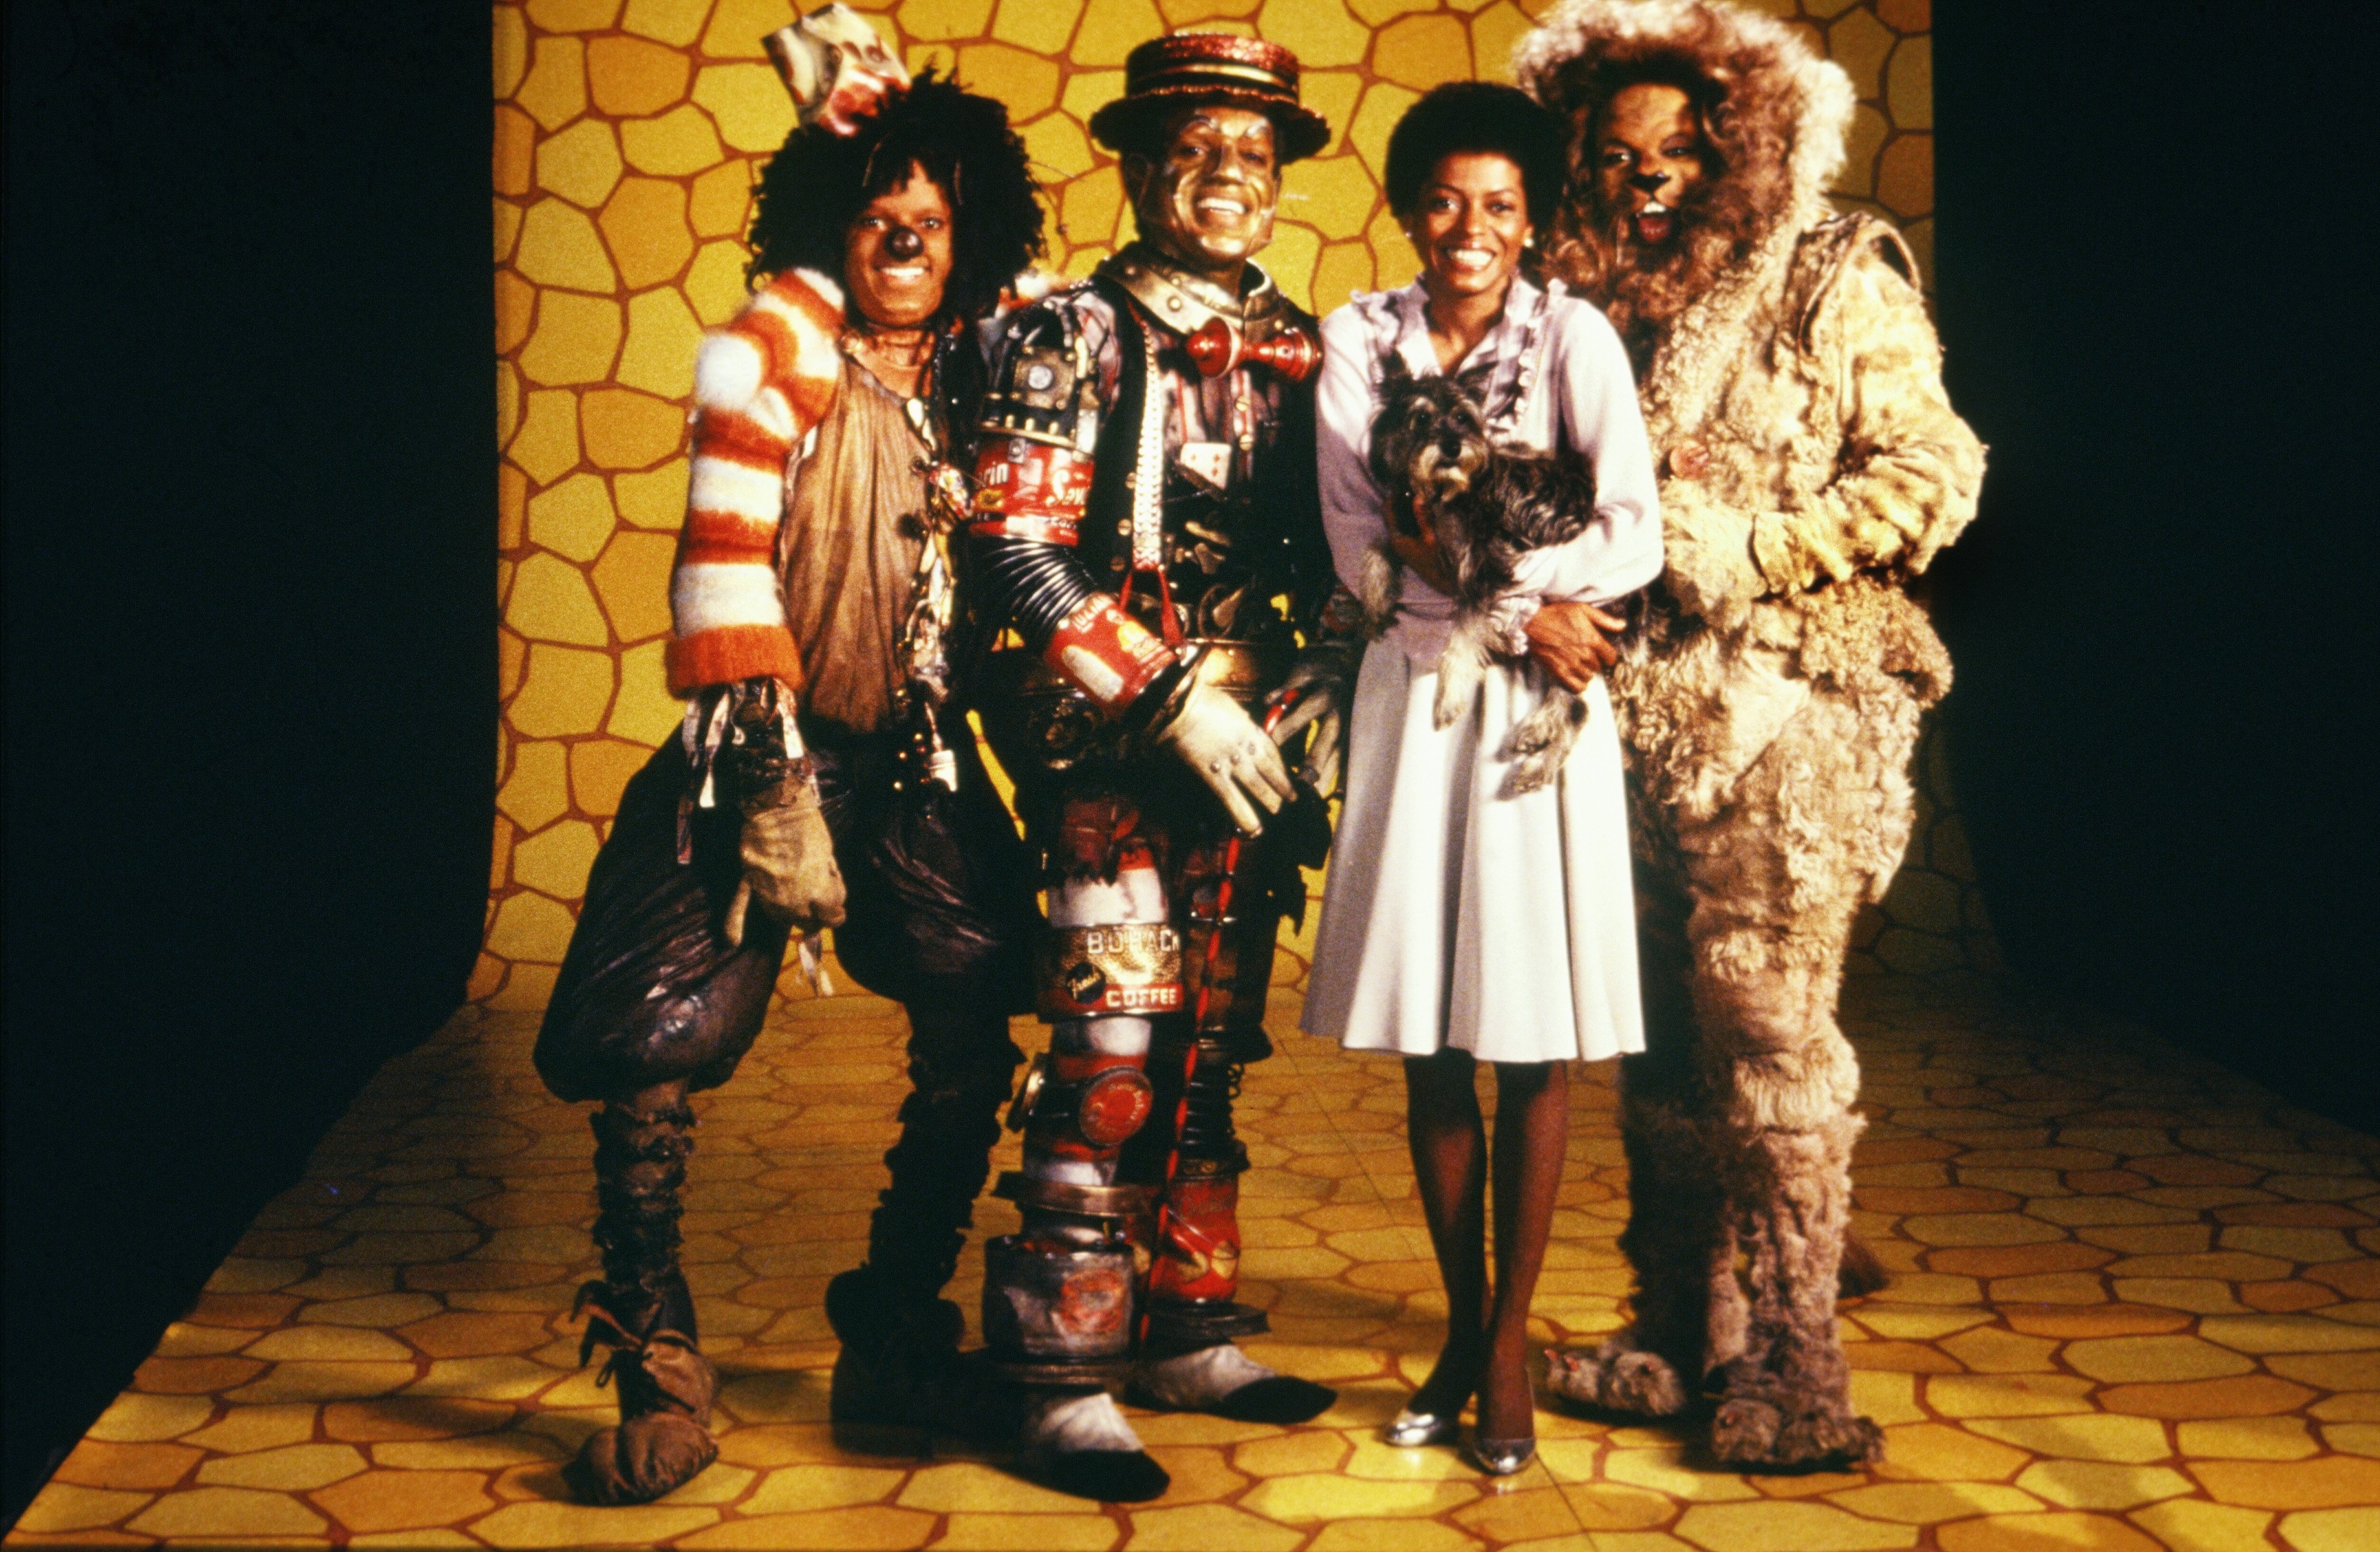 The cast of 'The Wiz' (L-R Michael Jackson, Nipsey Russell, Diana Ross and Ted Ross) pose for a publicity shot in 1978 in New York, New York. (Michael Ochs Archive/Getty Images)